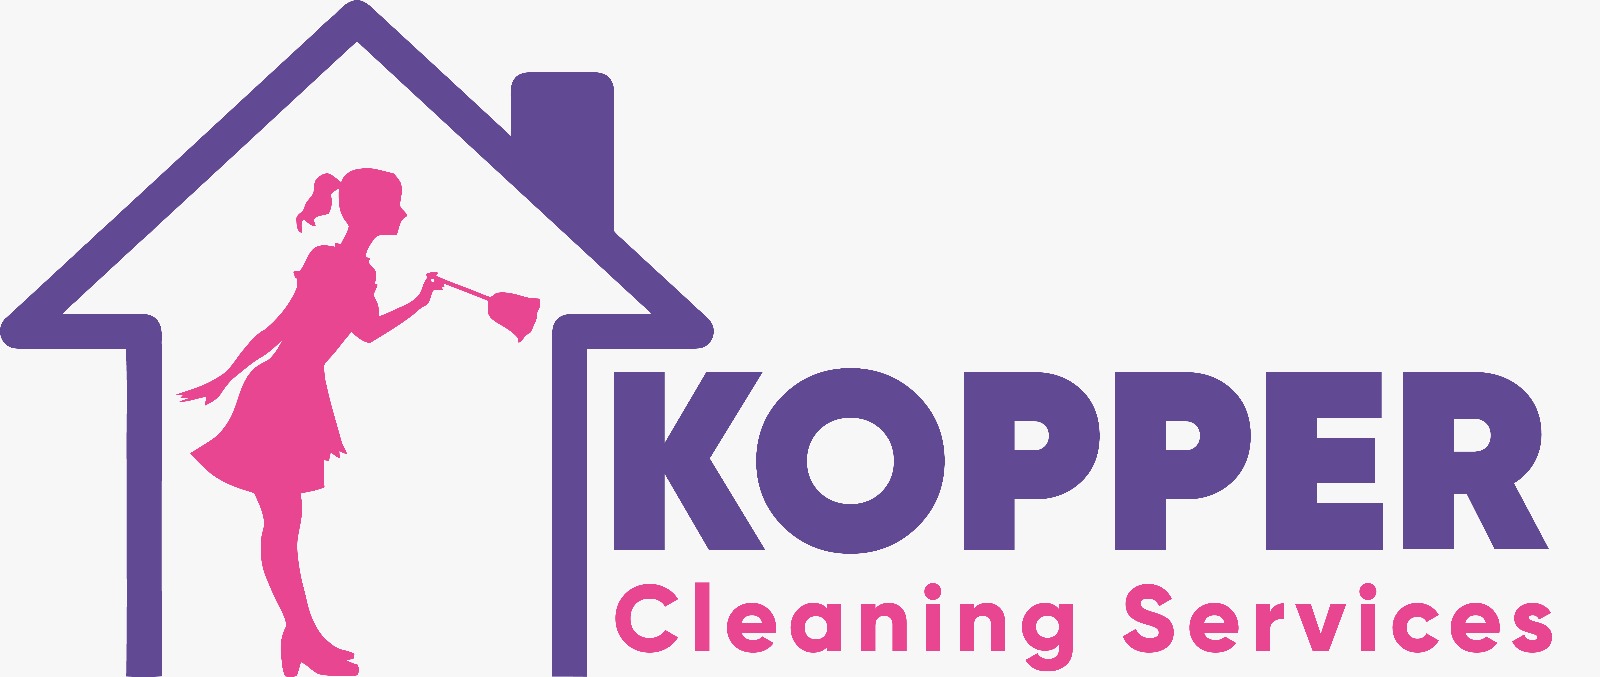 Kopper Cleaning Services, Inc. Logo